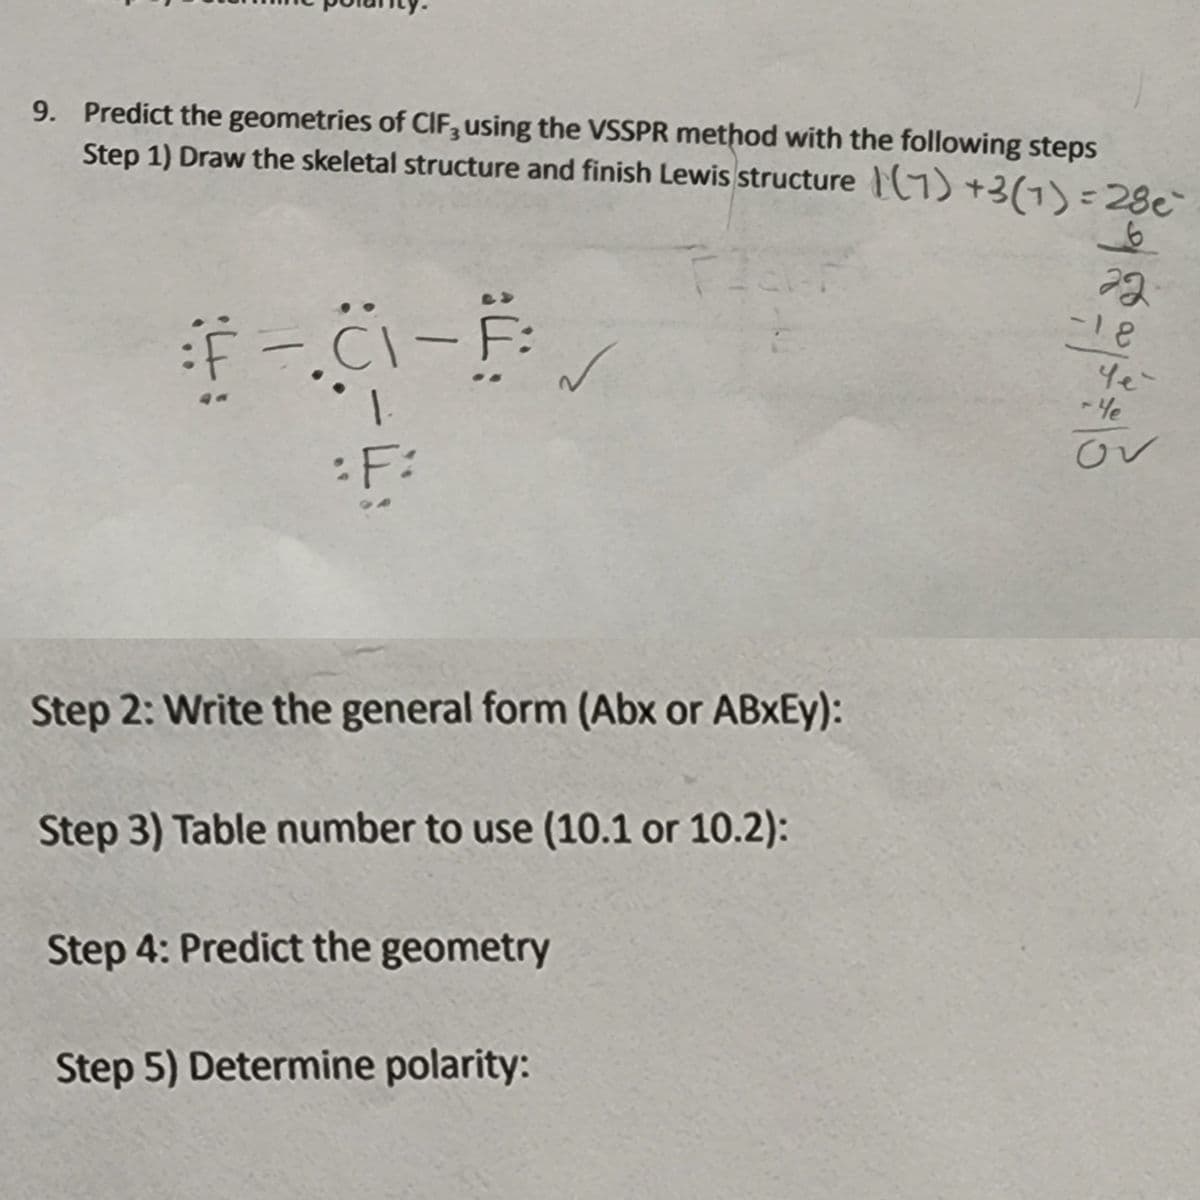 9. Predict the geometries of CIF, using the VSSPR method with the following steps
Step 1) Draw the skeletal structure and finish Lewis structure T(9) +3(1)-28e
-18
ov
:F:
Step 2: Write the general form (Abx or ABXEY):
Step 3) Table number to use (10.1 or 10.2):
Step 4: Predict the geometry
Step 5) Determine polarity:
